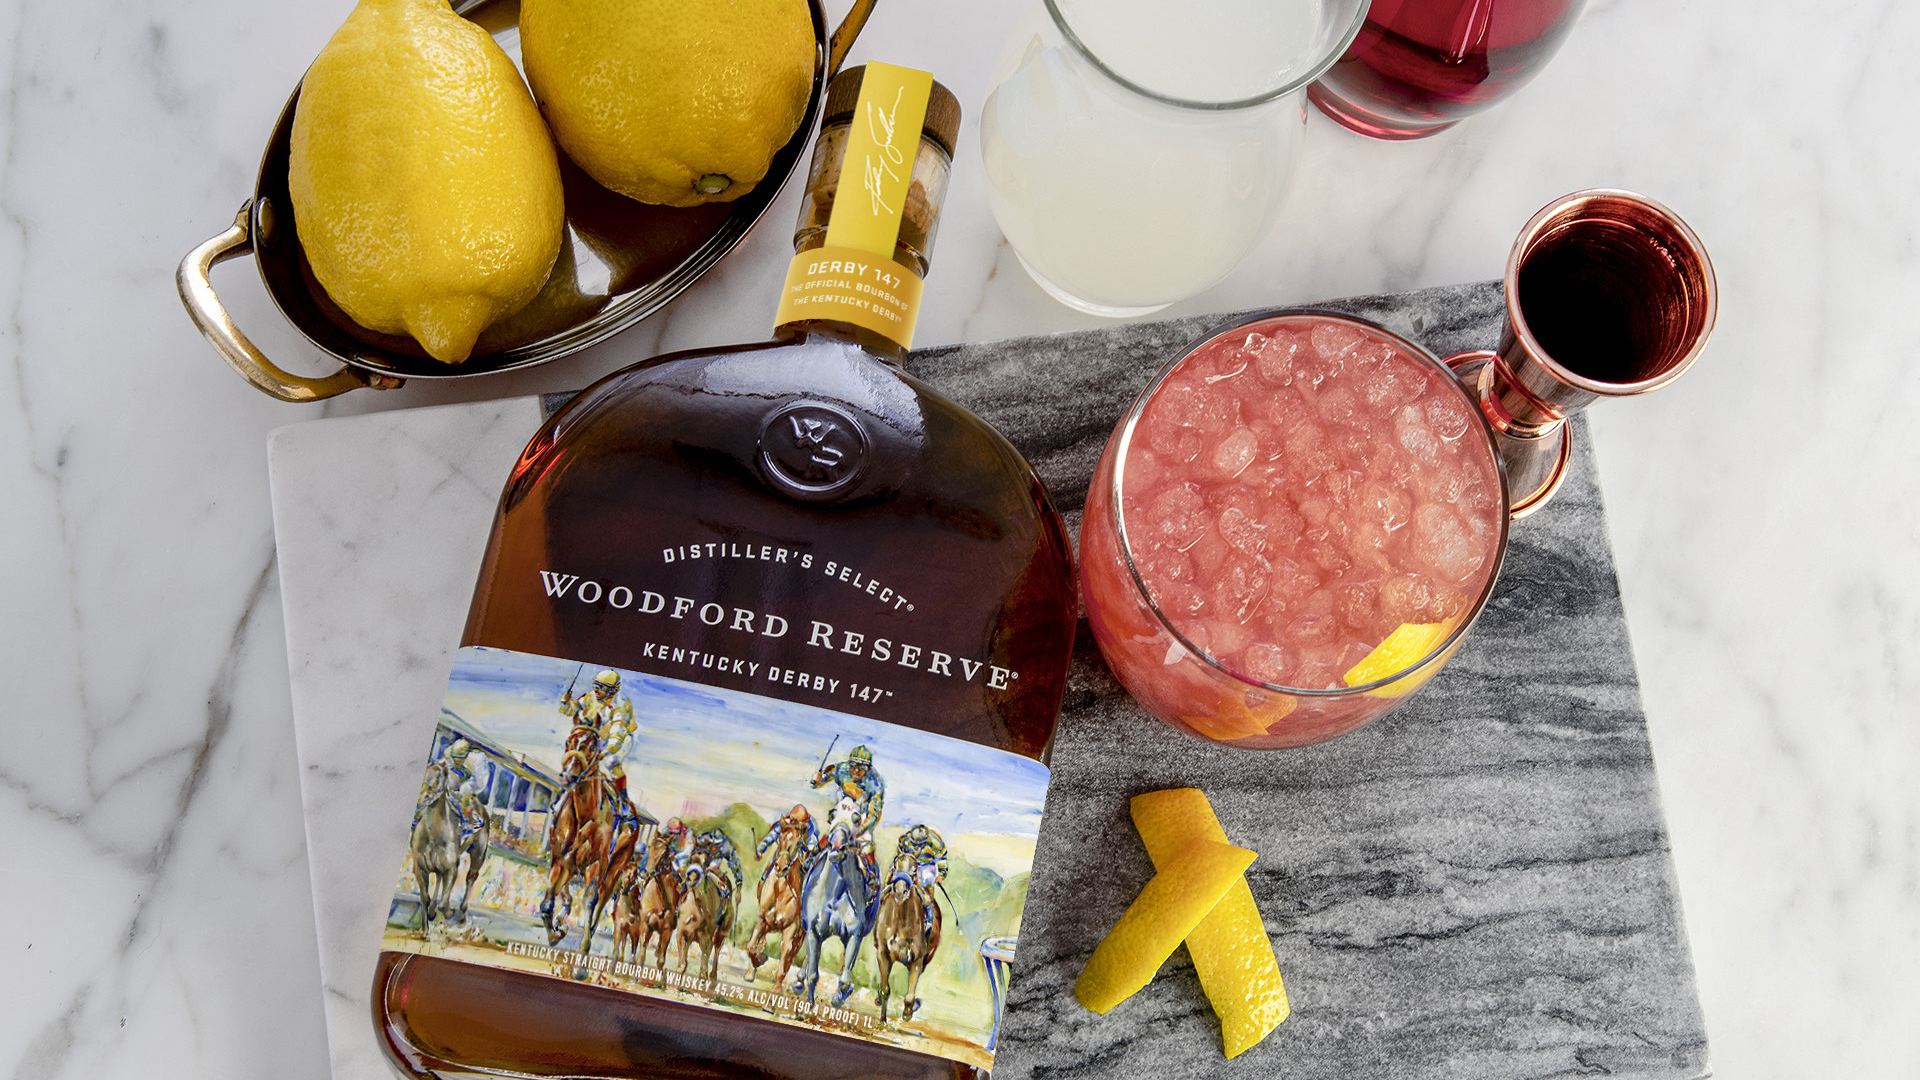 Woodford Reserve 2021 Derby bottle Feature